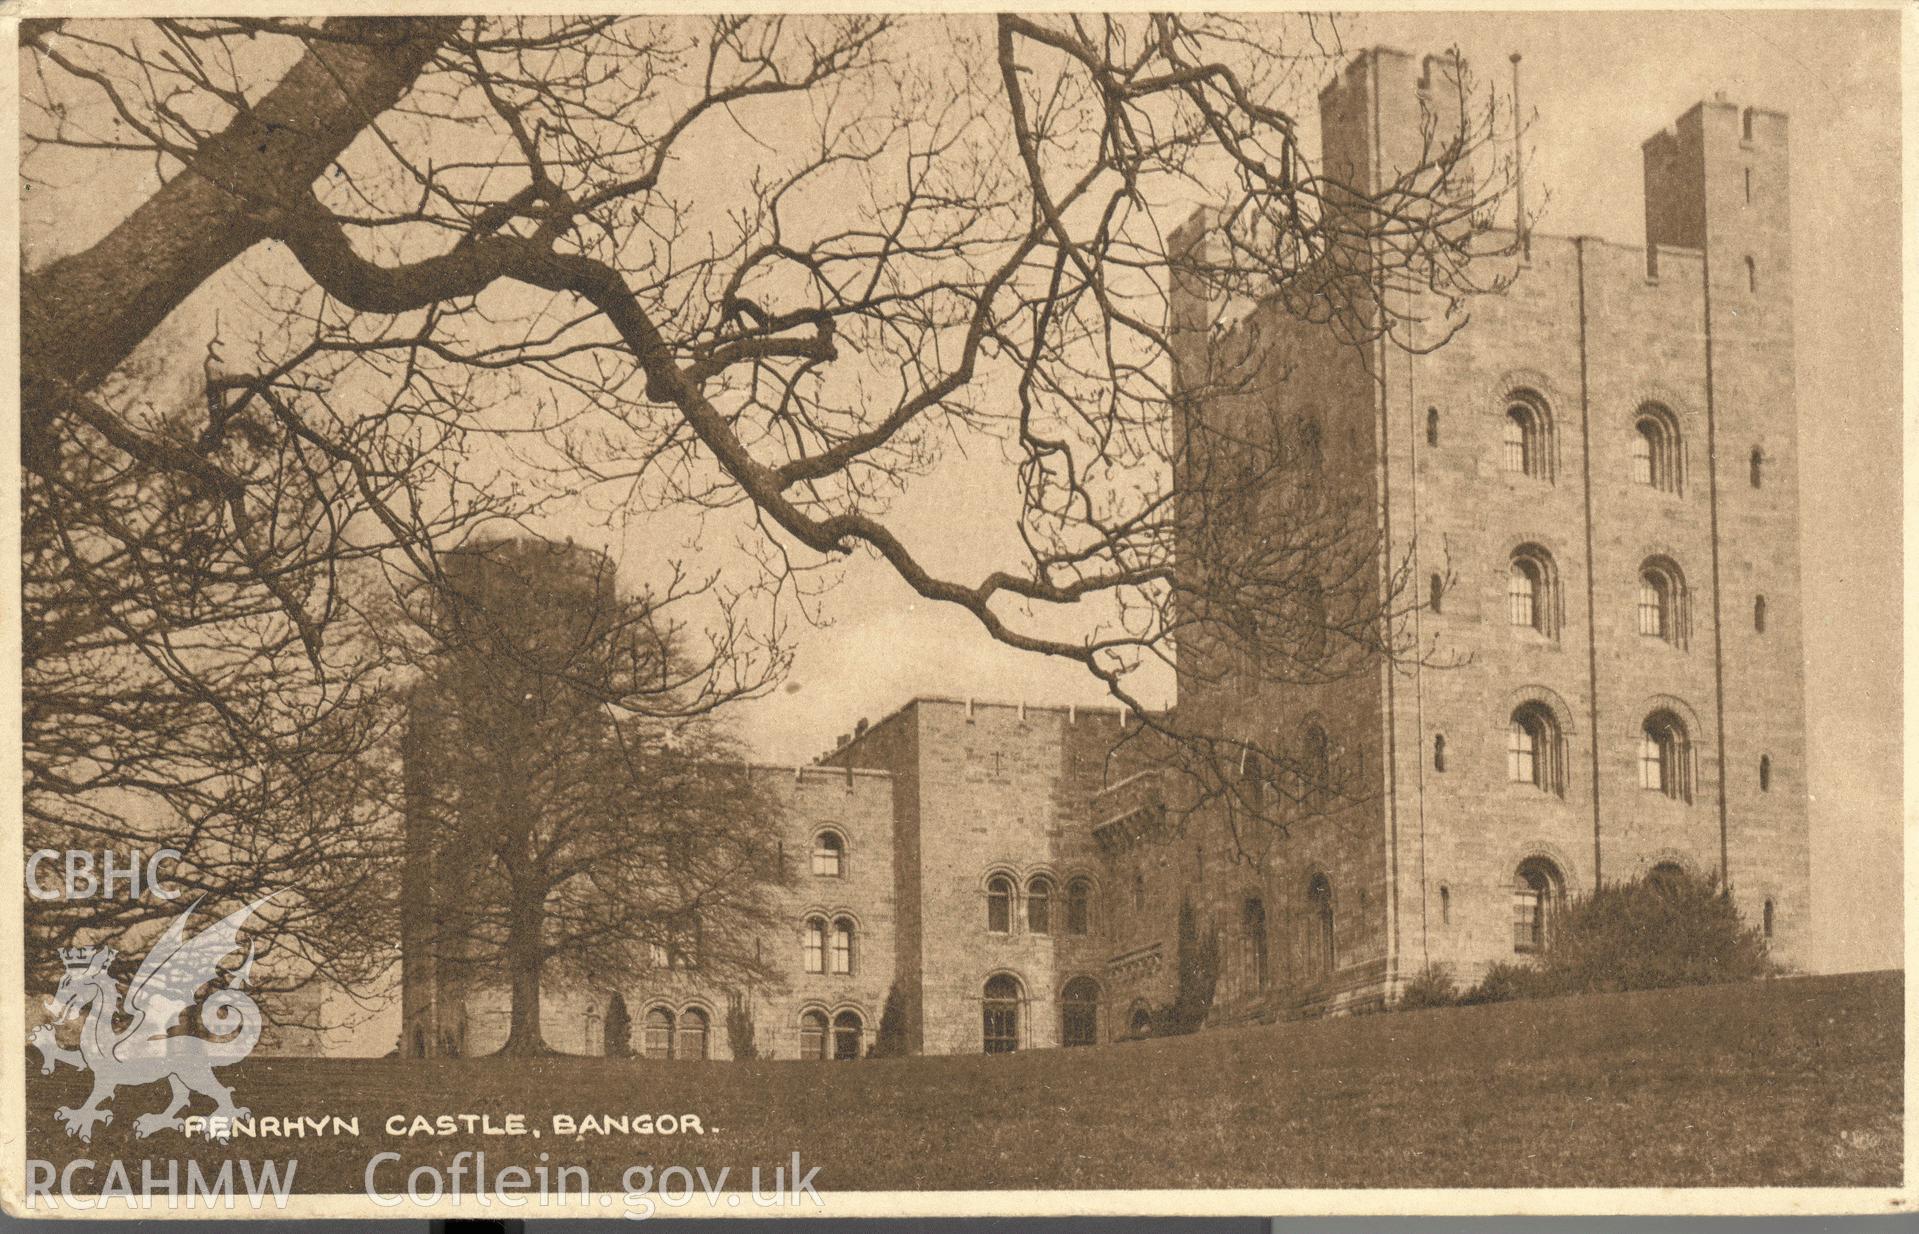 Digitised postcard image of Penrhyn Castle, Bangor, E.T.W. Dennis and Sons Ltd. Produced by Parks and Gardens Data Services, from an original item in the Peter Davis Collection at Parks and Gardens UK. We hold only web-resolution images of this collection, suitable for viewing on screen and for research purposes only. We do not hold the original images, or publication quality scans.